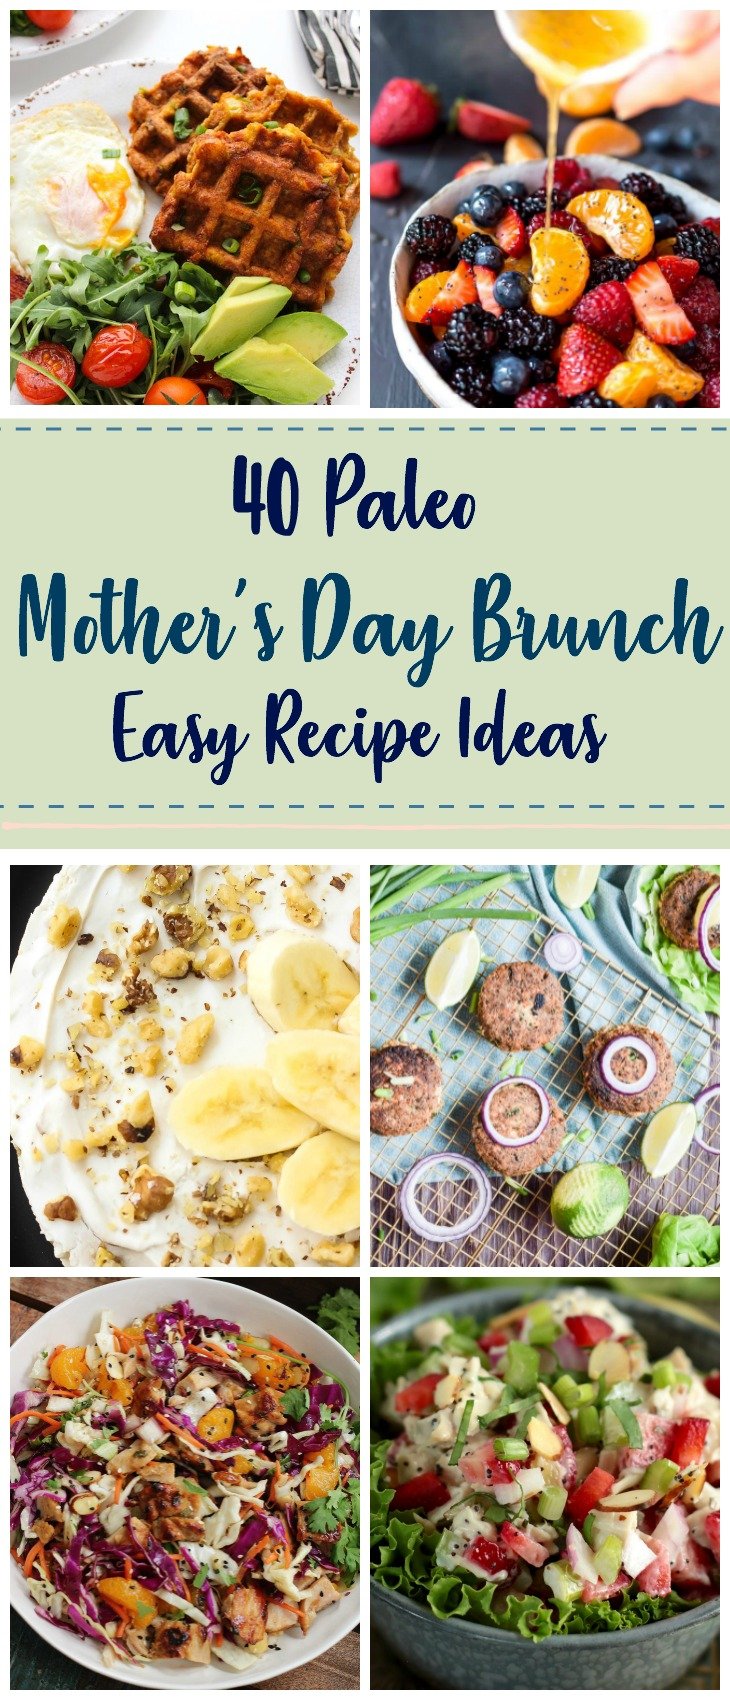 These Paleo Mother's Day recipe ideas will help you create the best Mother's Day brunch menu for that special woman in your life. These Paleo recipes are all easy, and a lot of them are even Whole30 Mother's Day brunch options! You'll find all the Mother's Day recipes you need from breakfast to dessert! #paleomothersday #mothersdayrecipes #whole30mothersday #paleobrunchrecipes